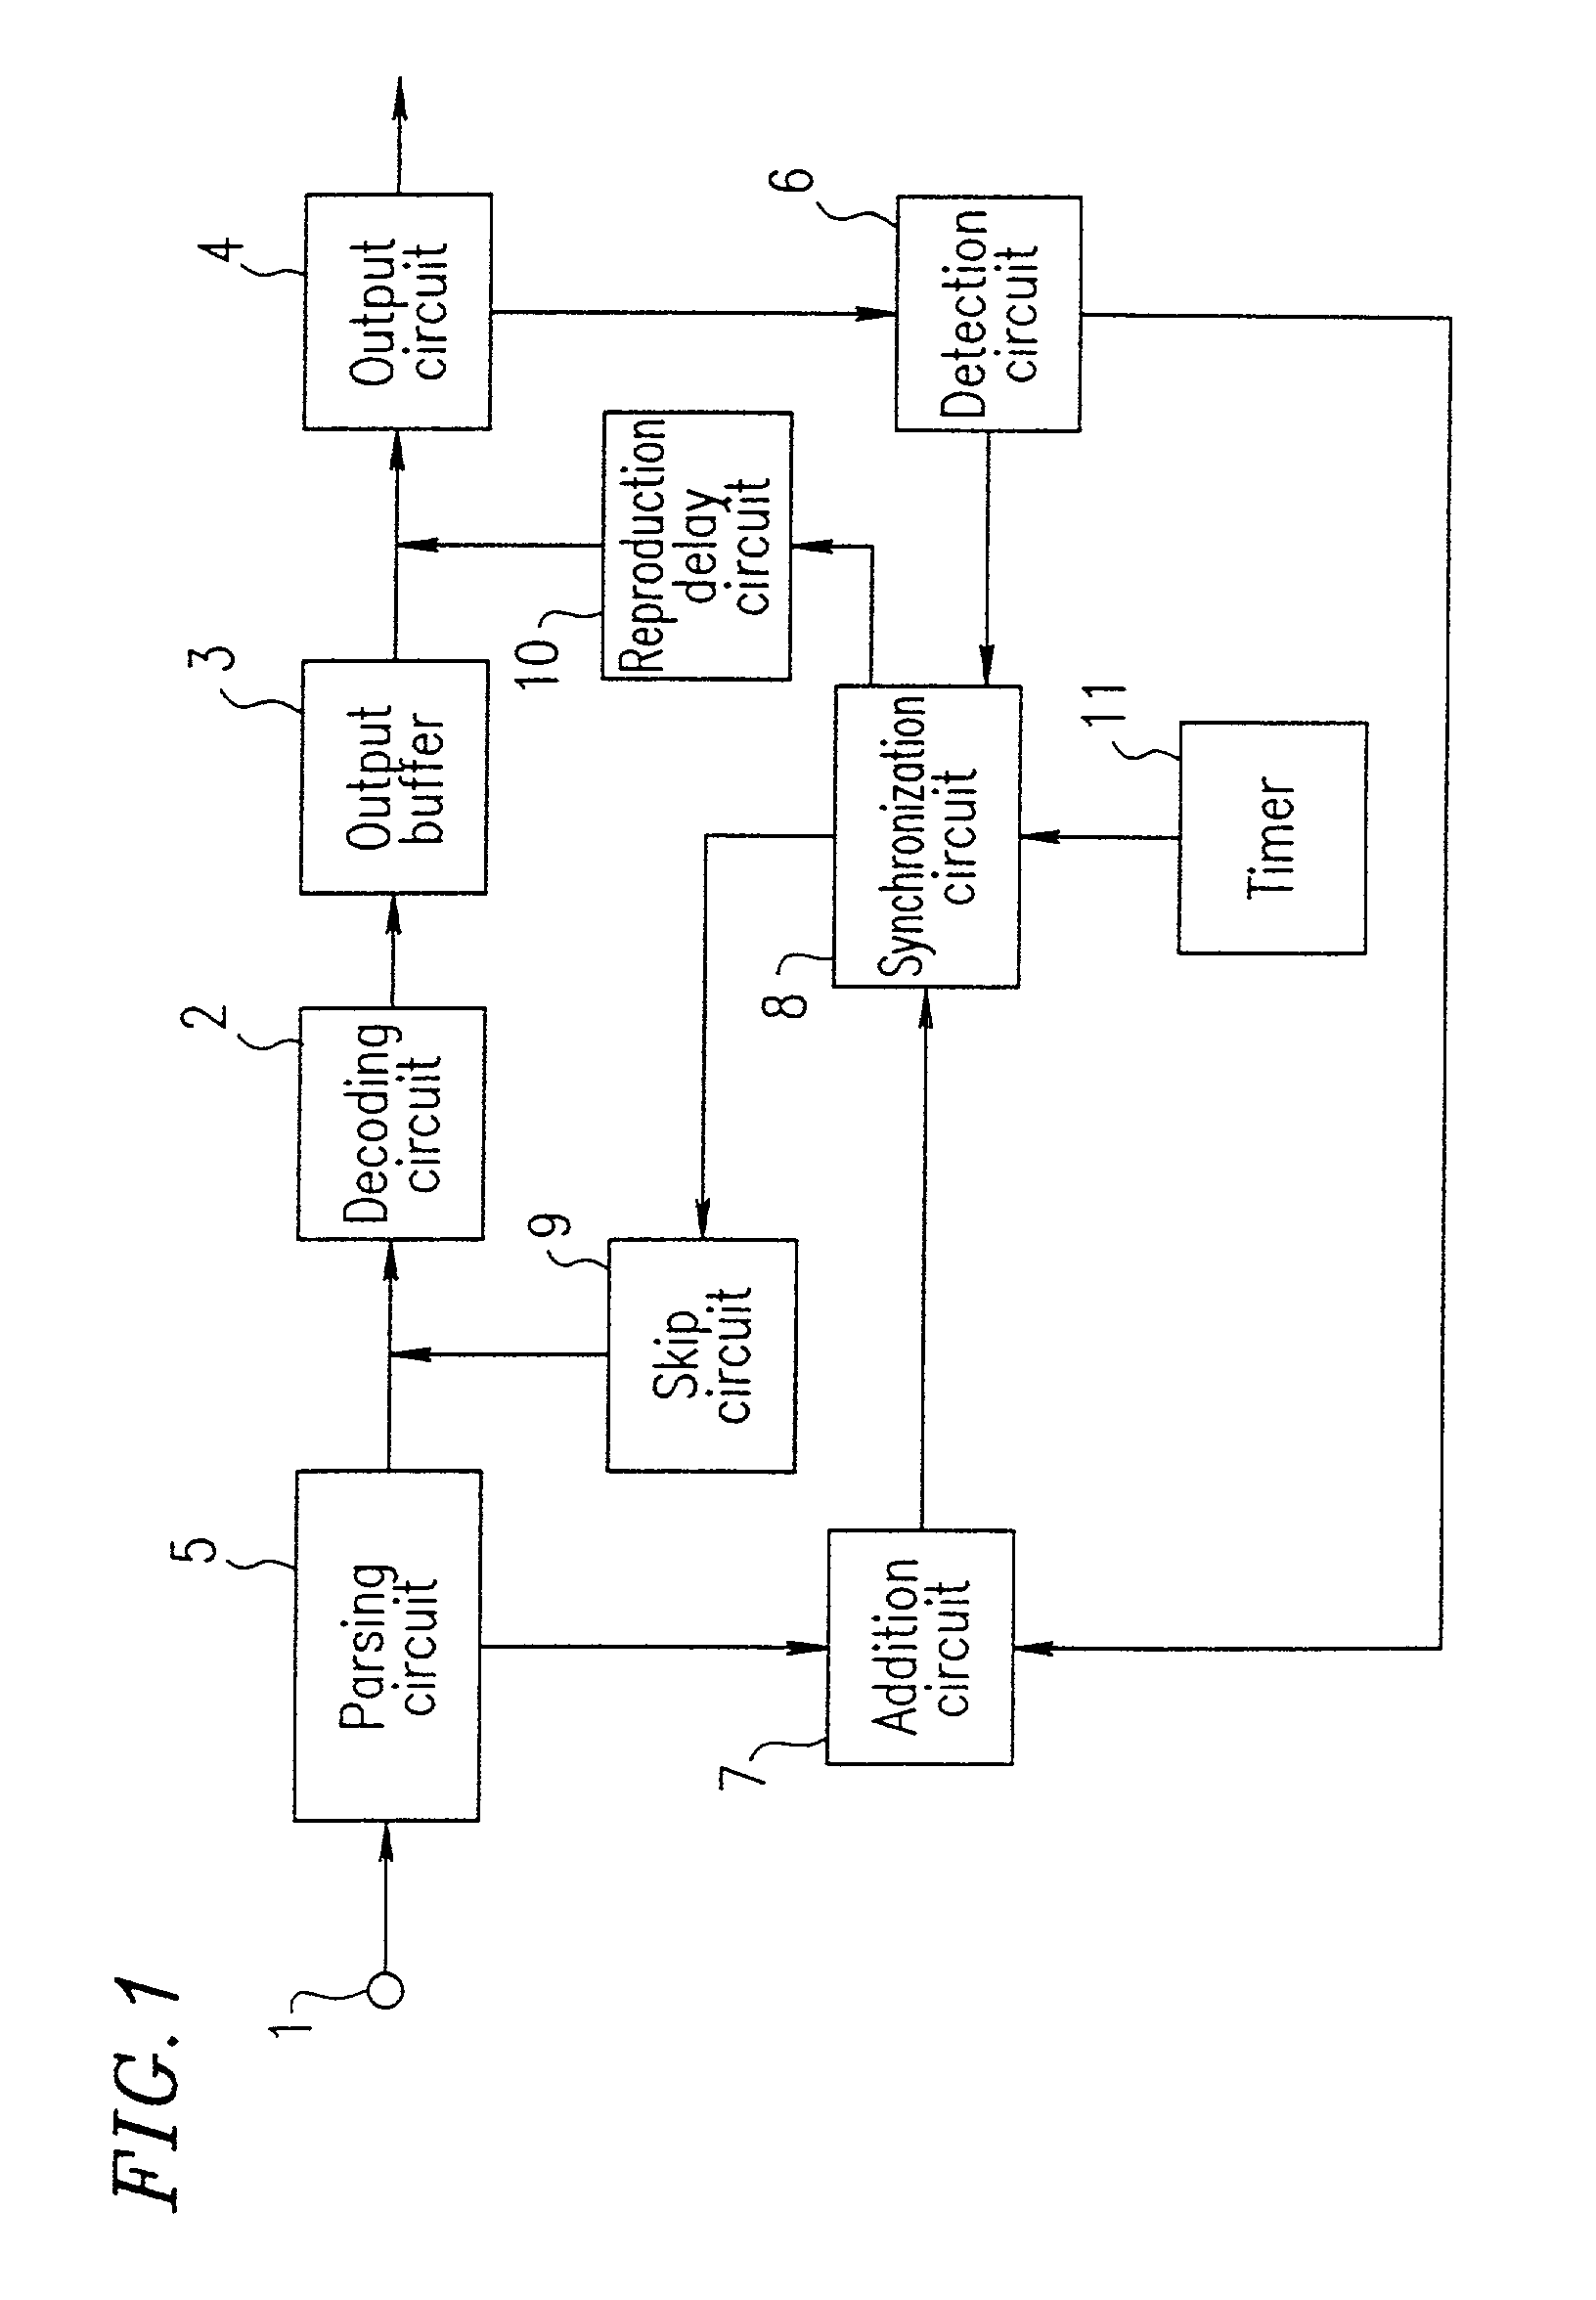 Compressed code decoding device and audio decoding device